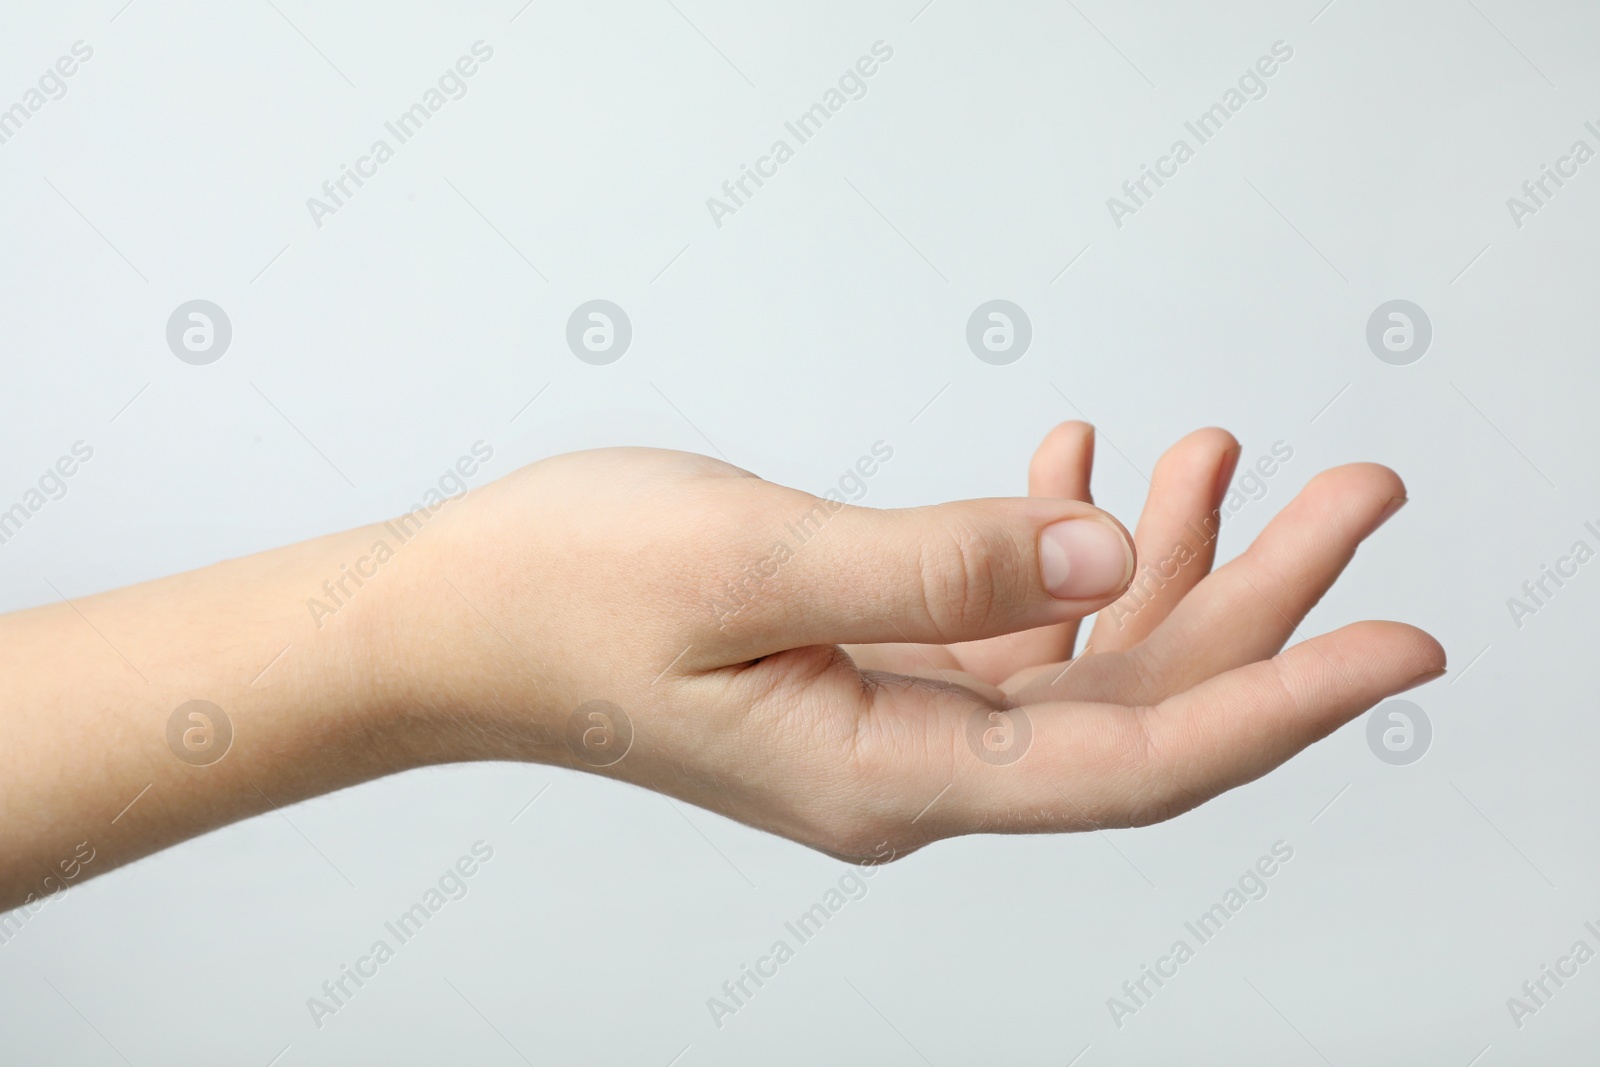 Photo of Woman holding something against light background, focus on hand